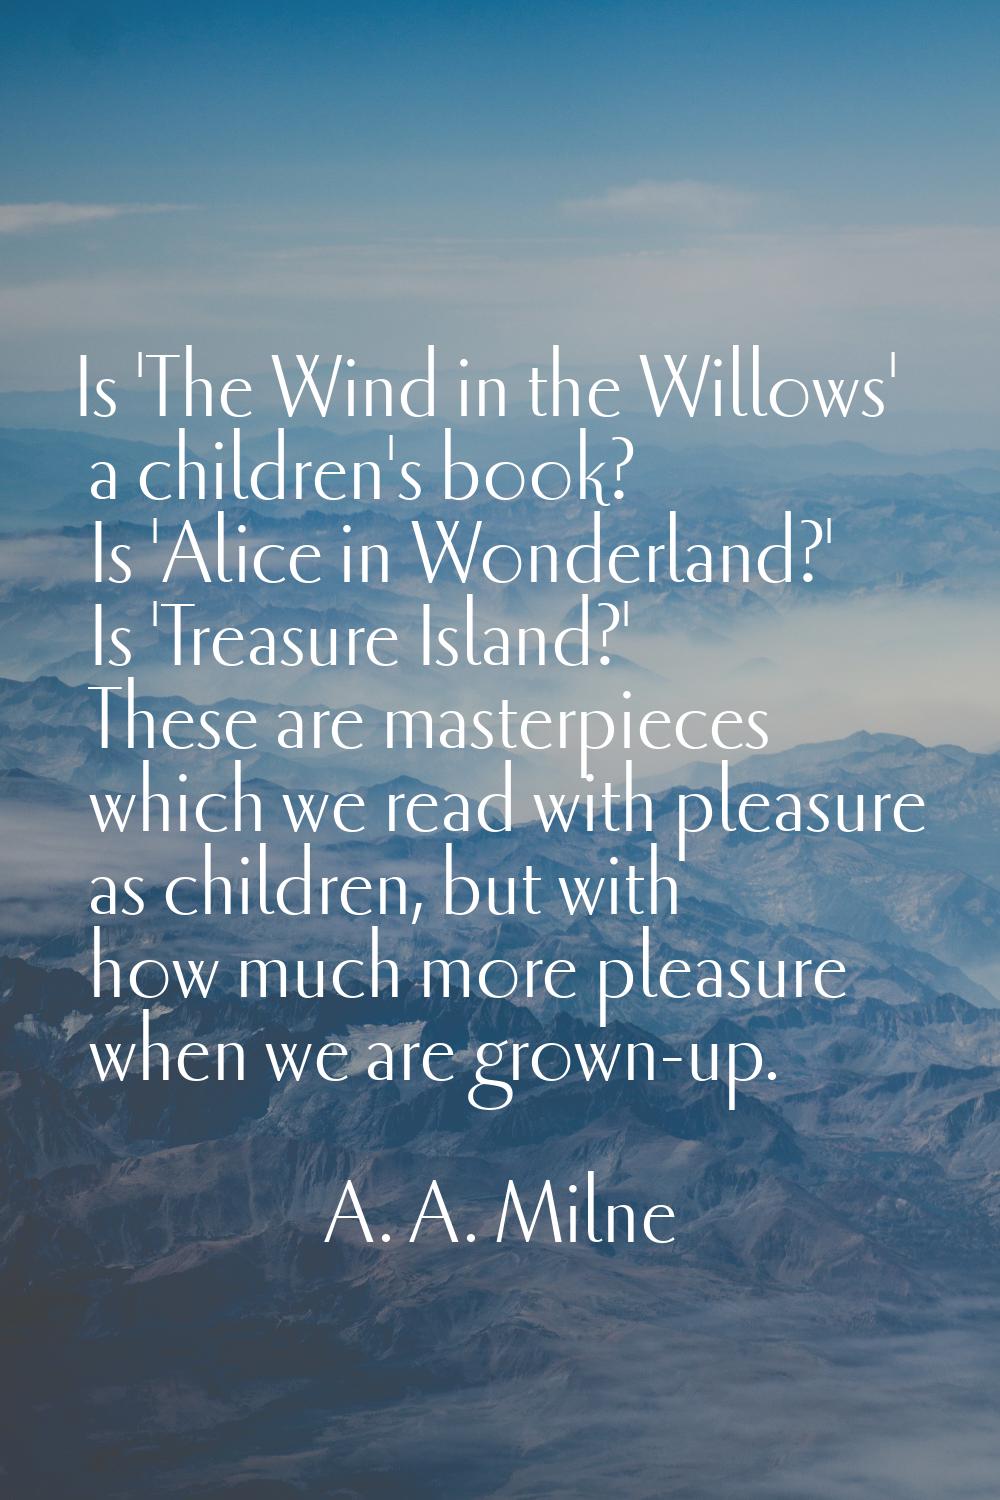 Is 'The Wind in the Willows' a children's book? Is 'Alice in Wonderland?' Is 'Treasure Island?' The